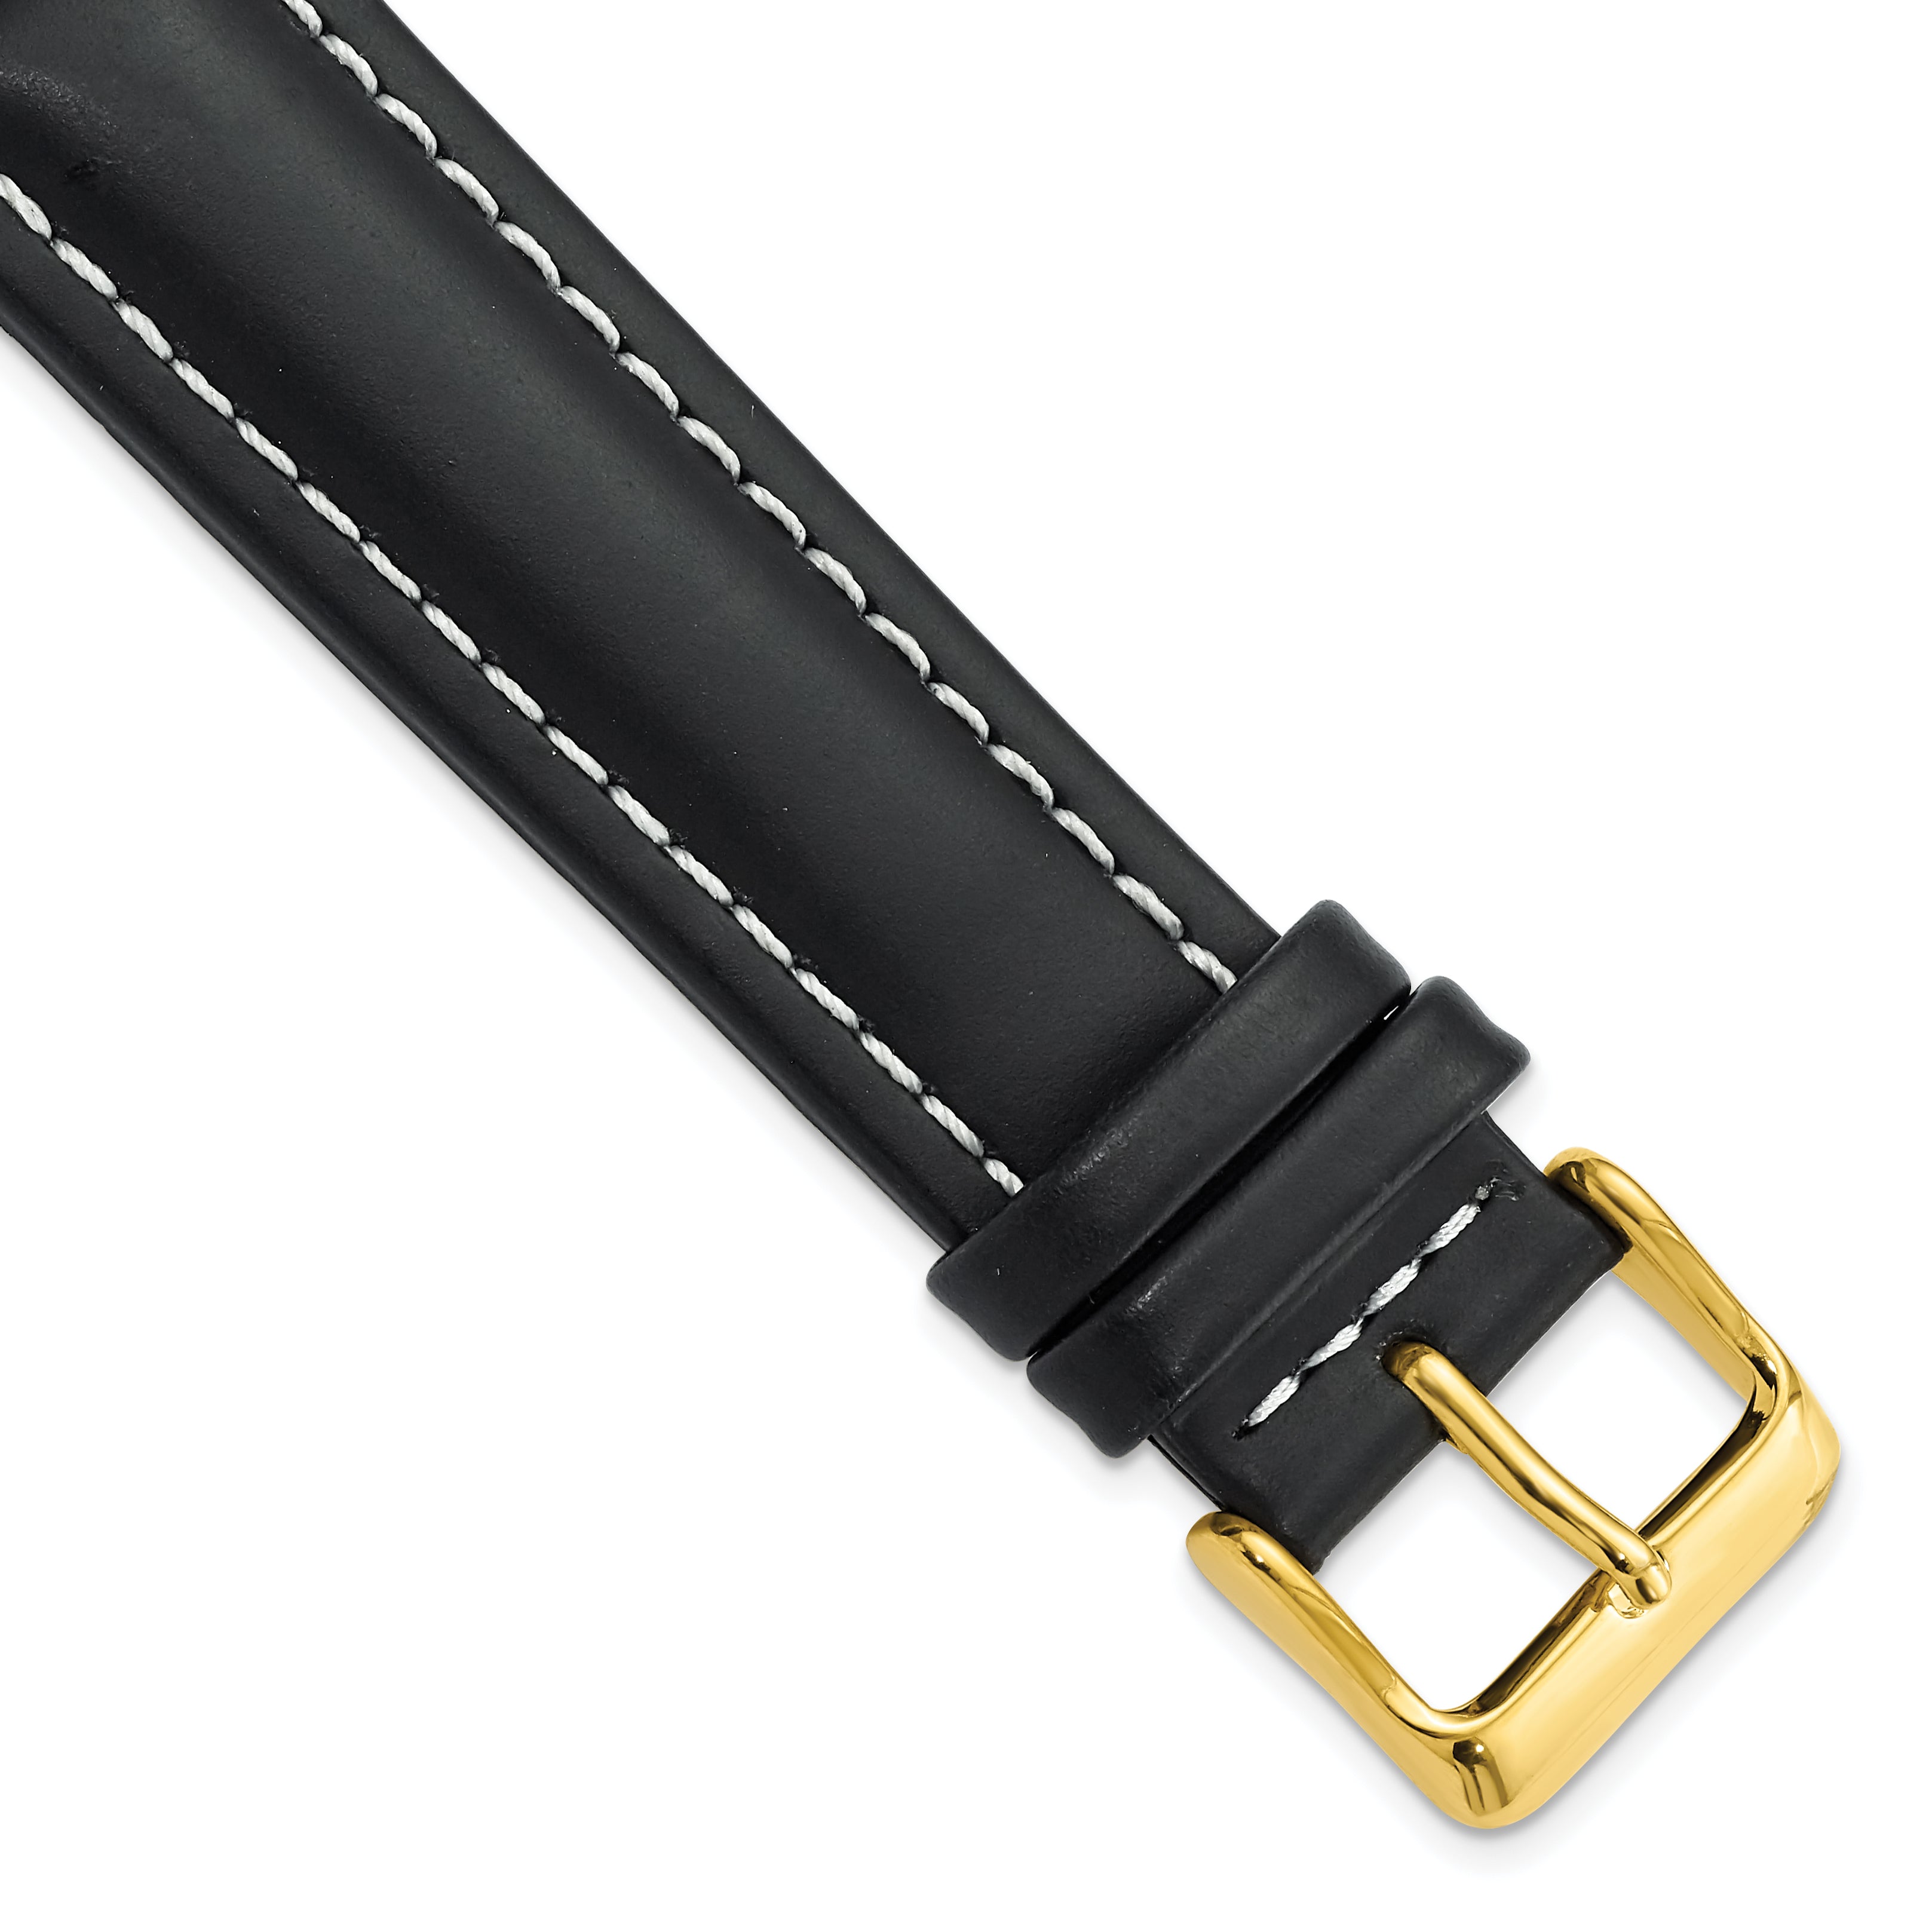 DeBeer 20mm Black Oil-tanned Leather with White Stitching and Gold-tone Buckle 7.5 inch Watch Band